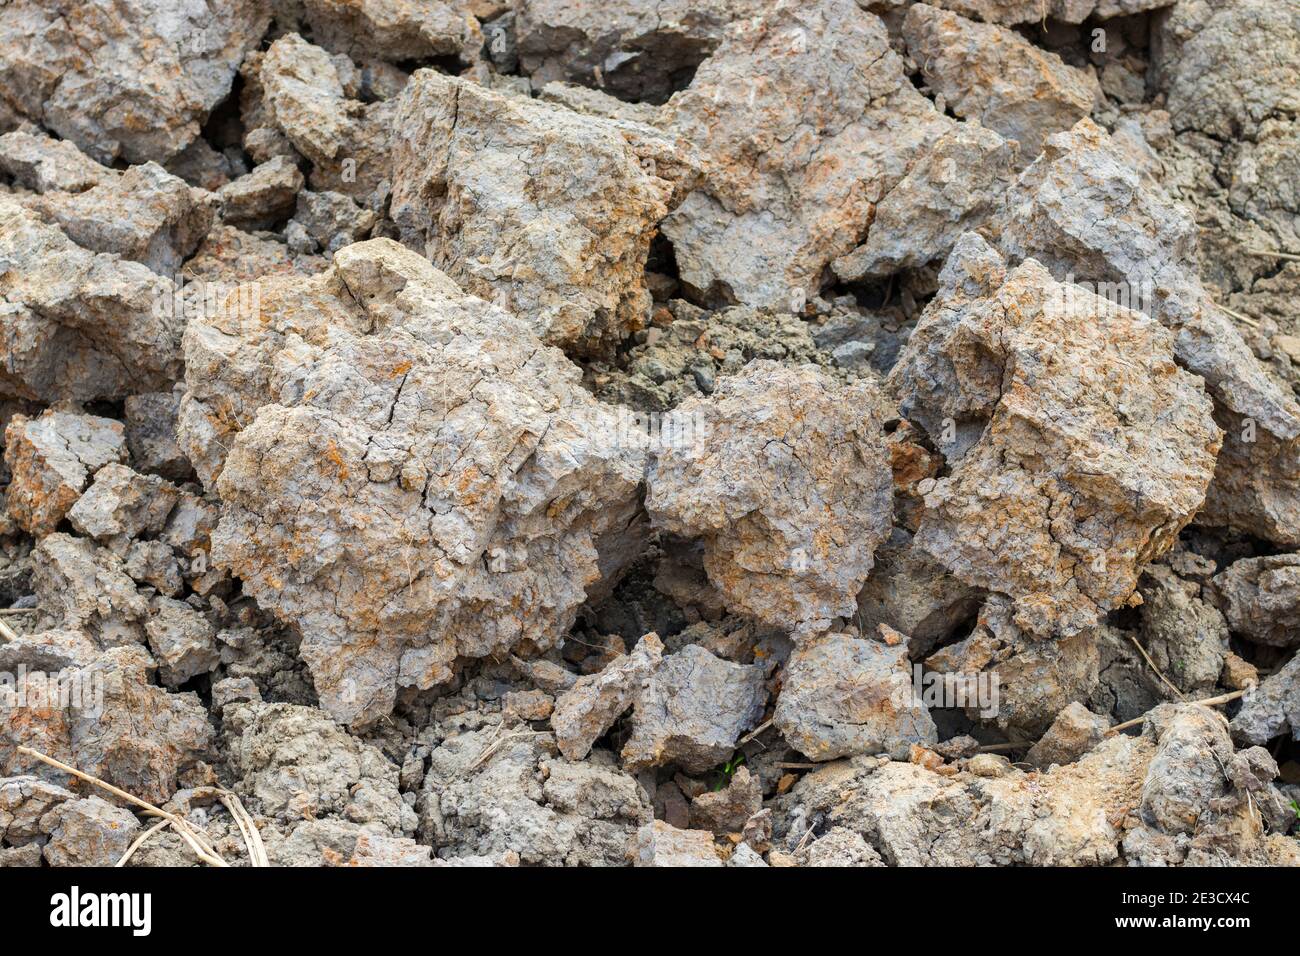 silt soil is a high fertility soil for agriculture, Silt is granular material of a size between sand and clay. Stock Photo